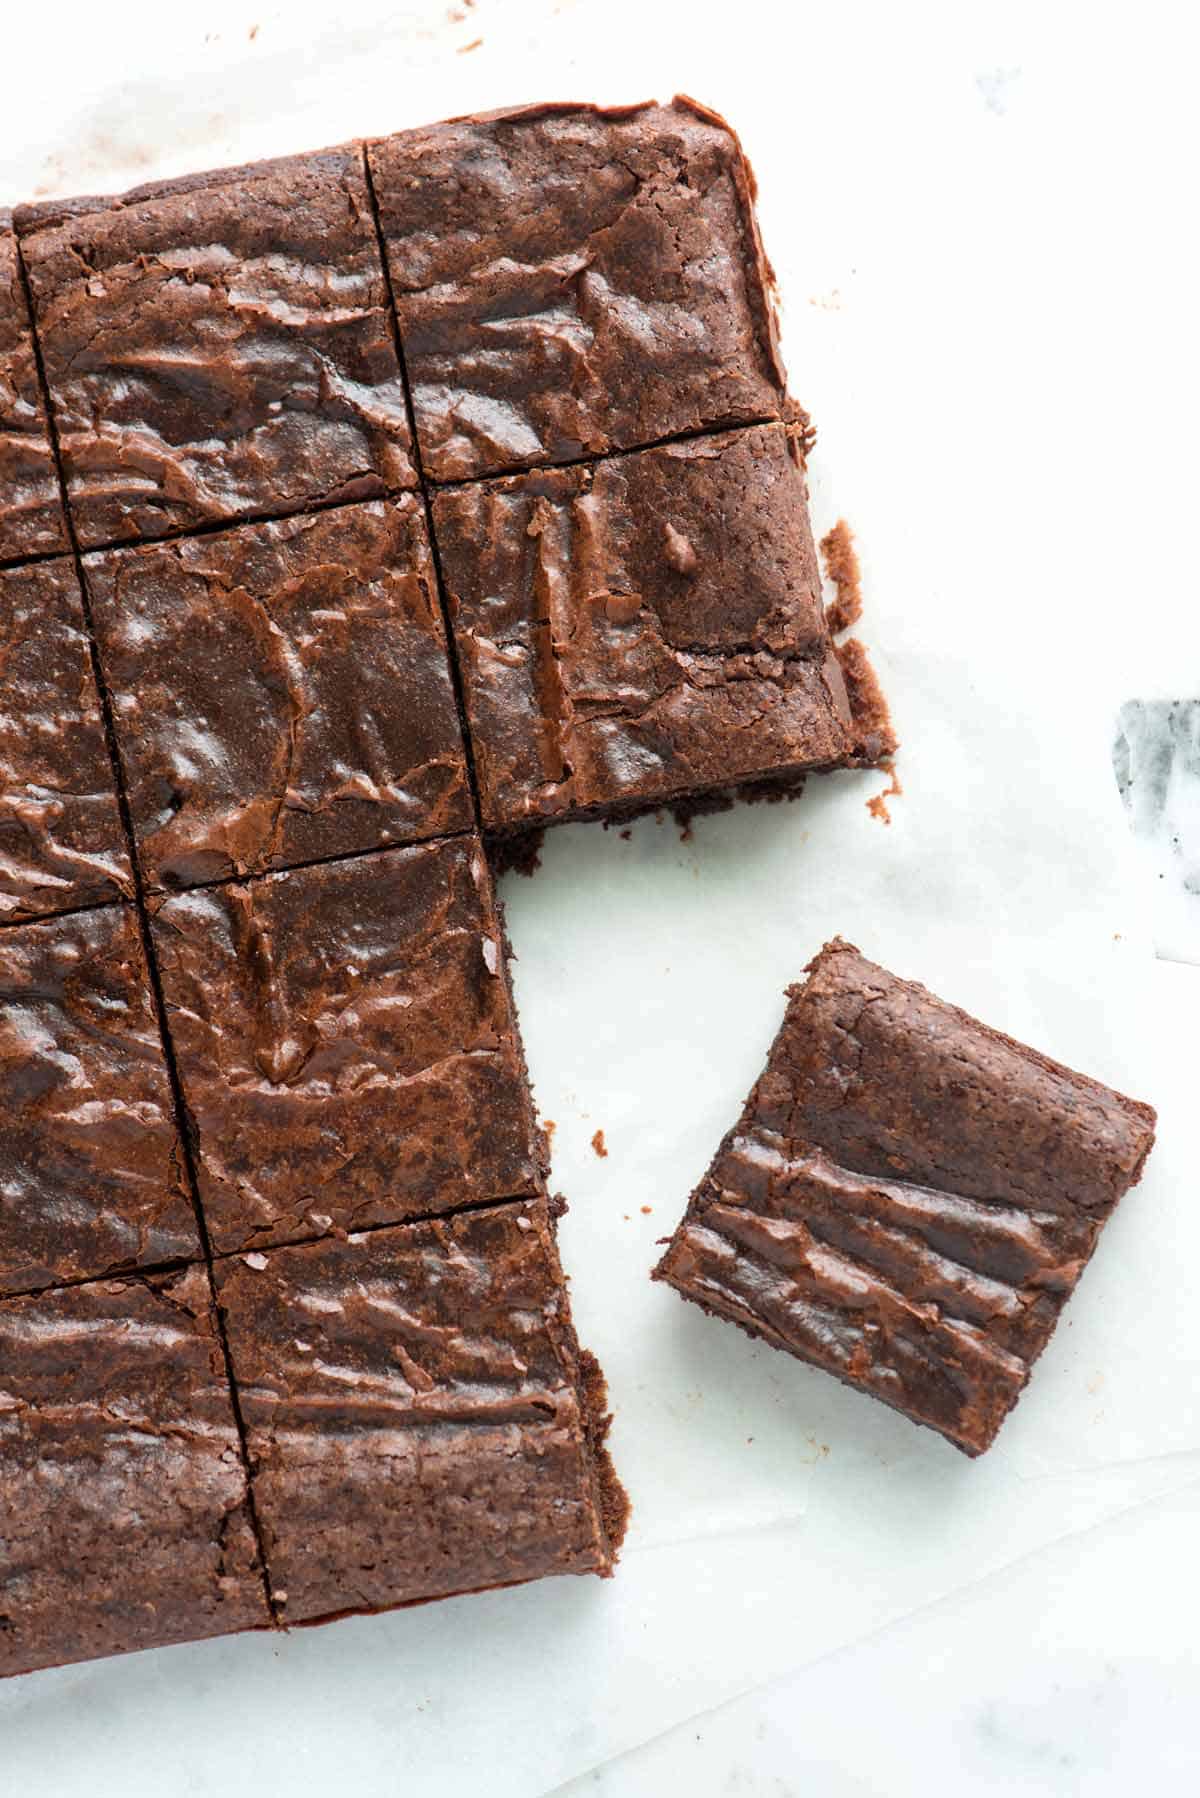 Our best chocolate brownies with crinkly tops